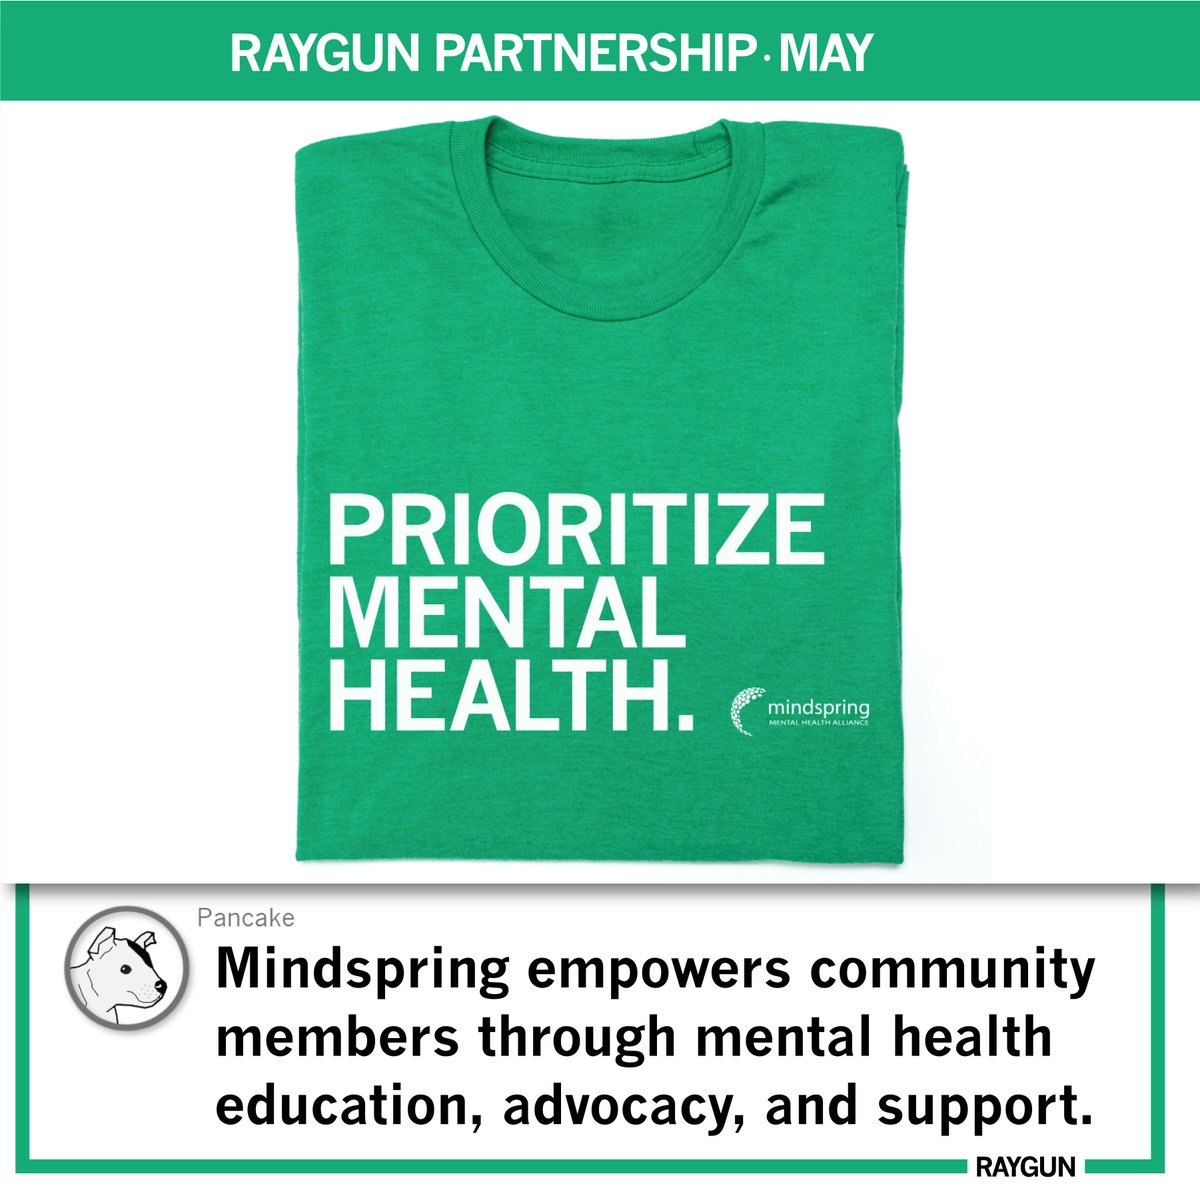 Happy May! We have some great new partnerships to announce to kick the month off. We are working with The Wellbeing Partners, Kings Harvest Pet Rescue, and @mindspringinfo to help raise proceeds. Check them out online now, in stores soon! #raygun